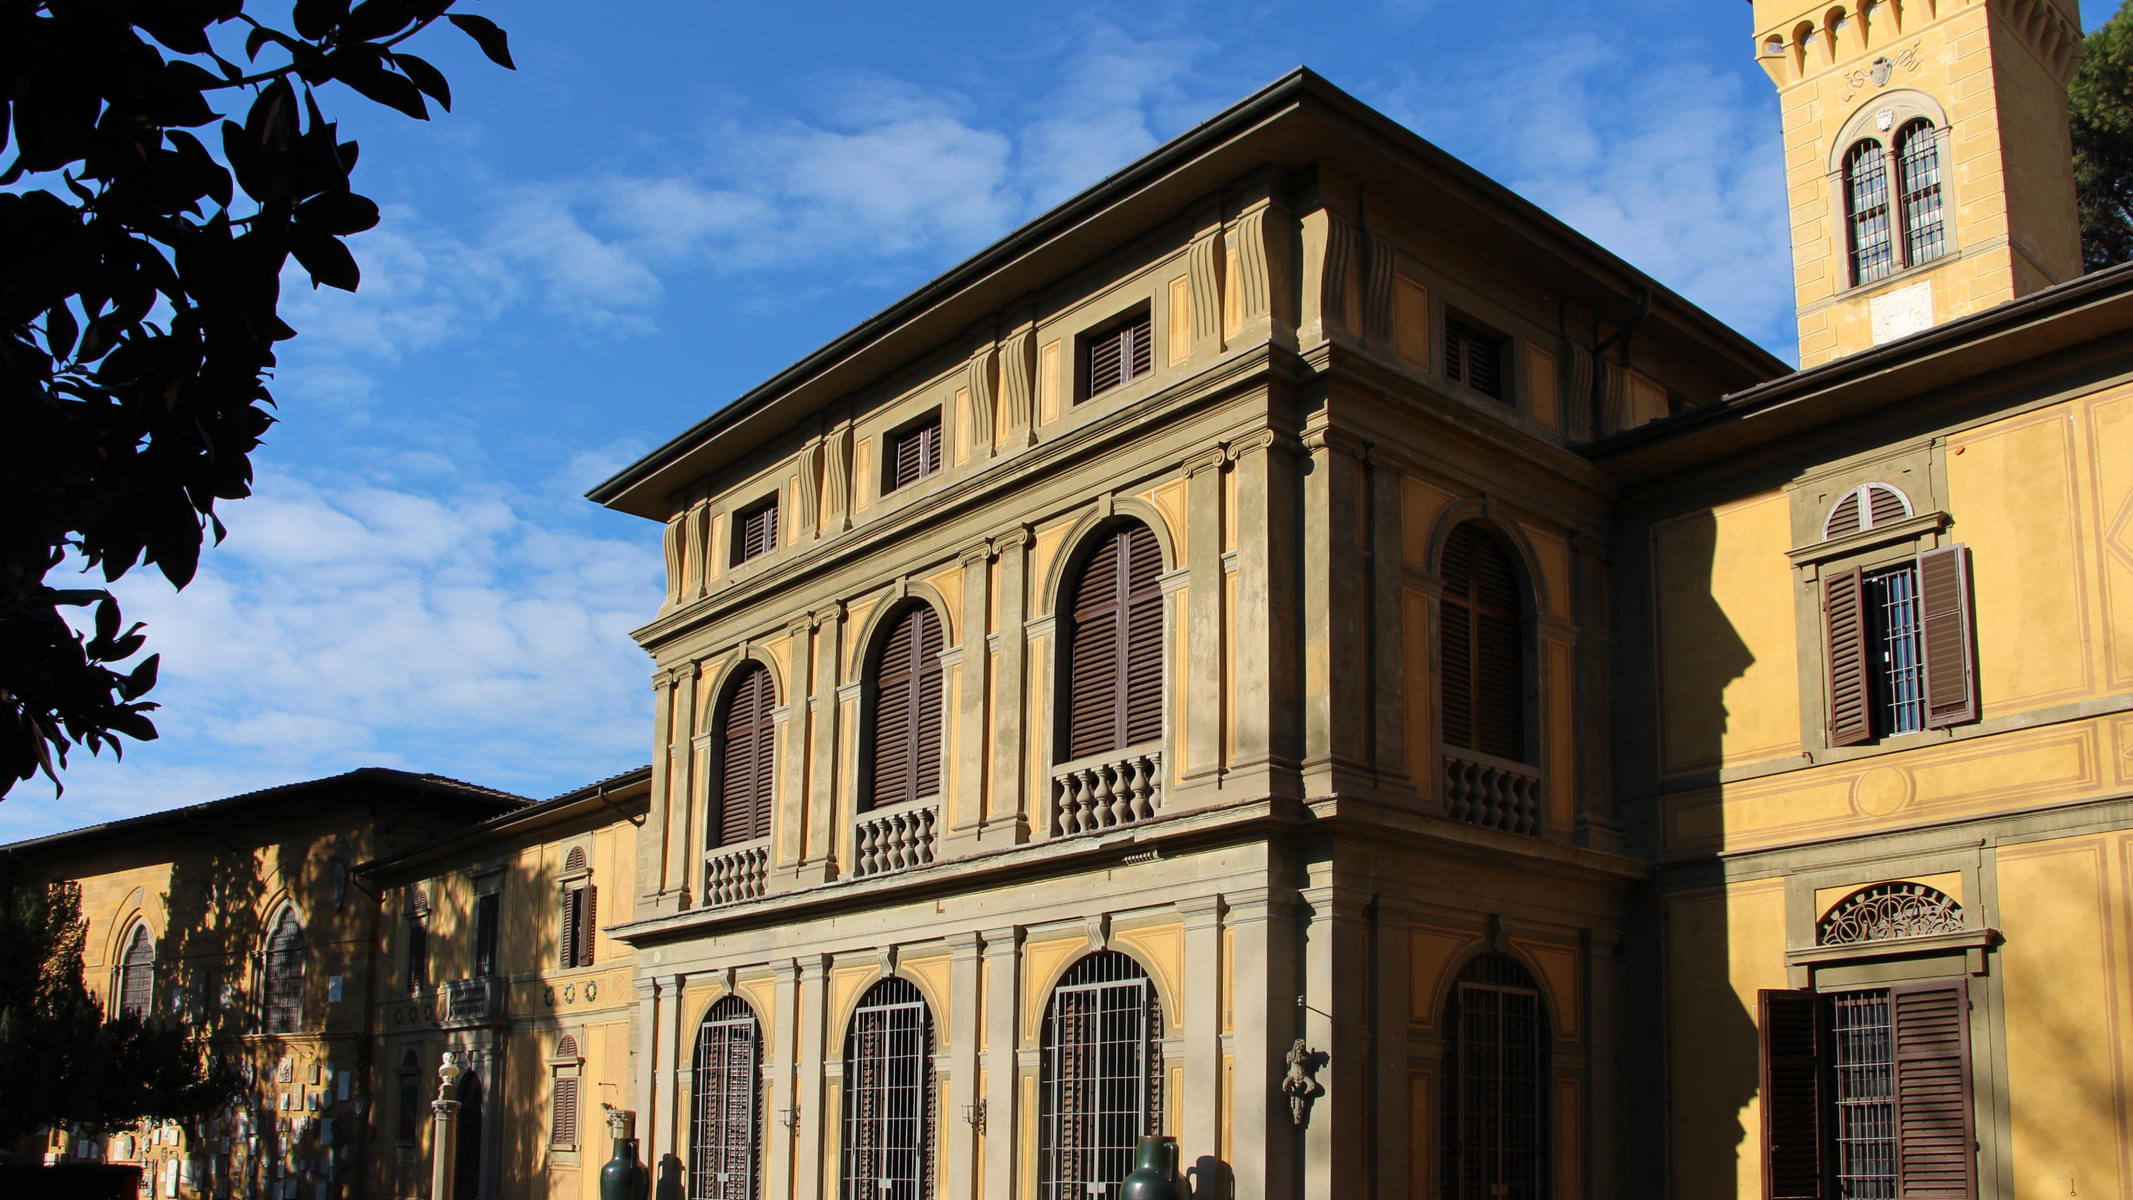 Marvel at the architecture of the museum which is in nineteenth-century style by architect Giuseppe Poggi.